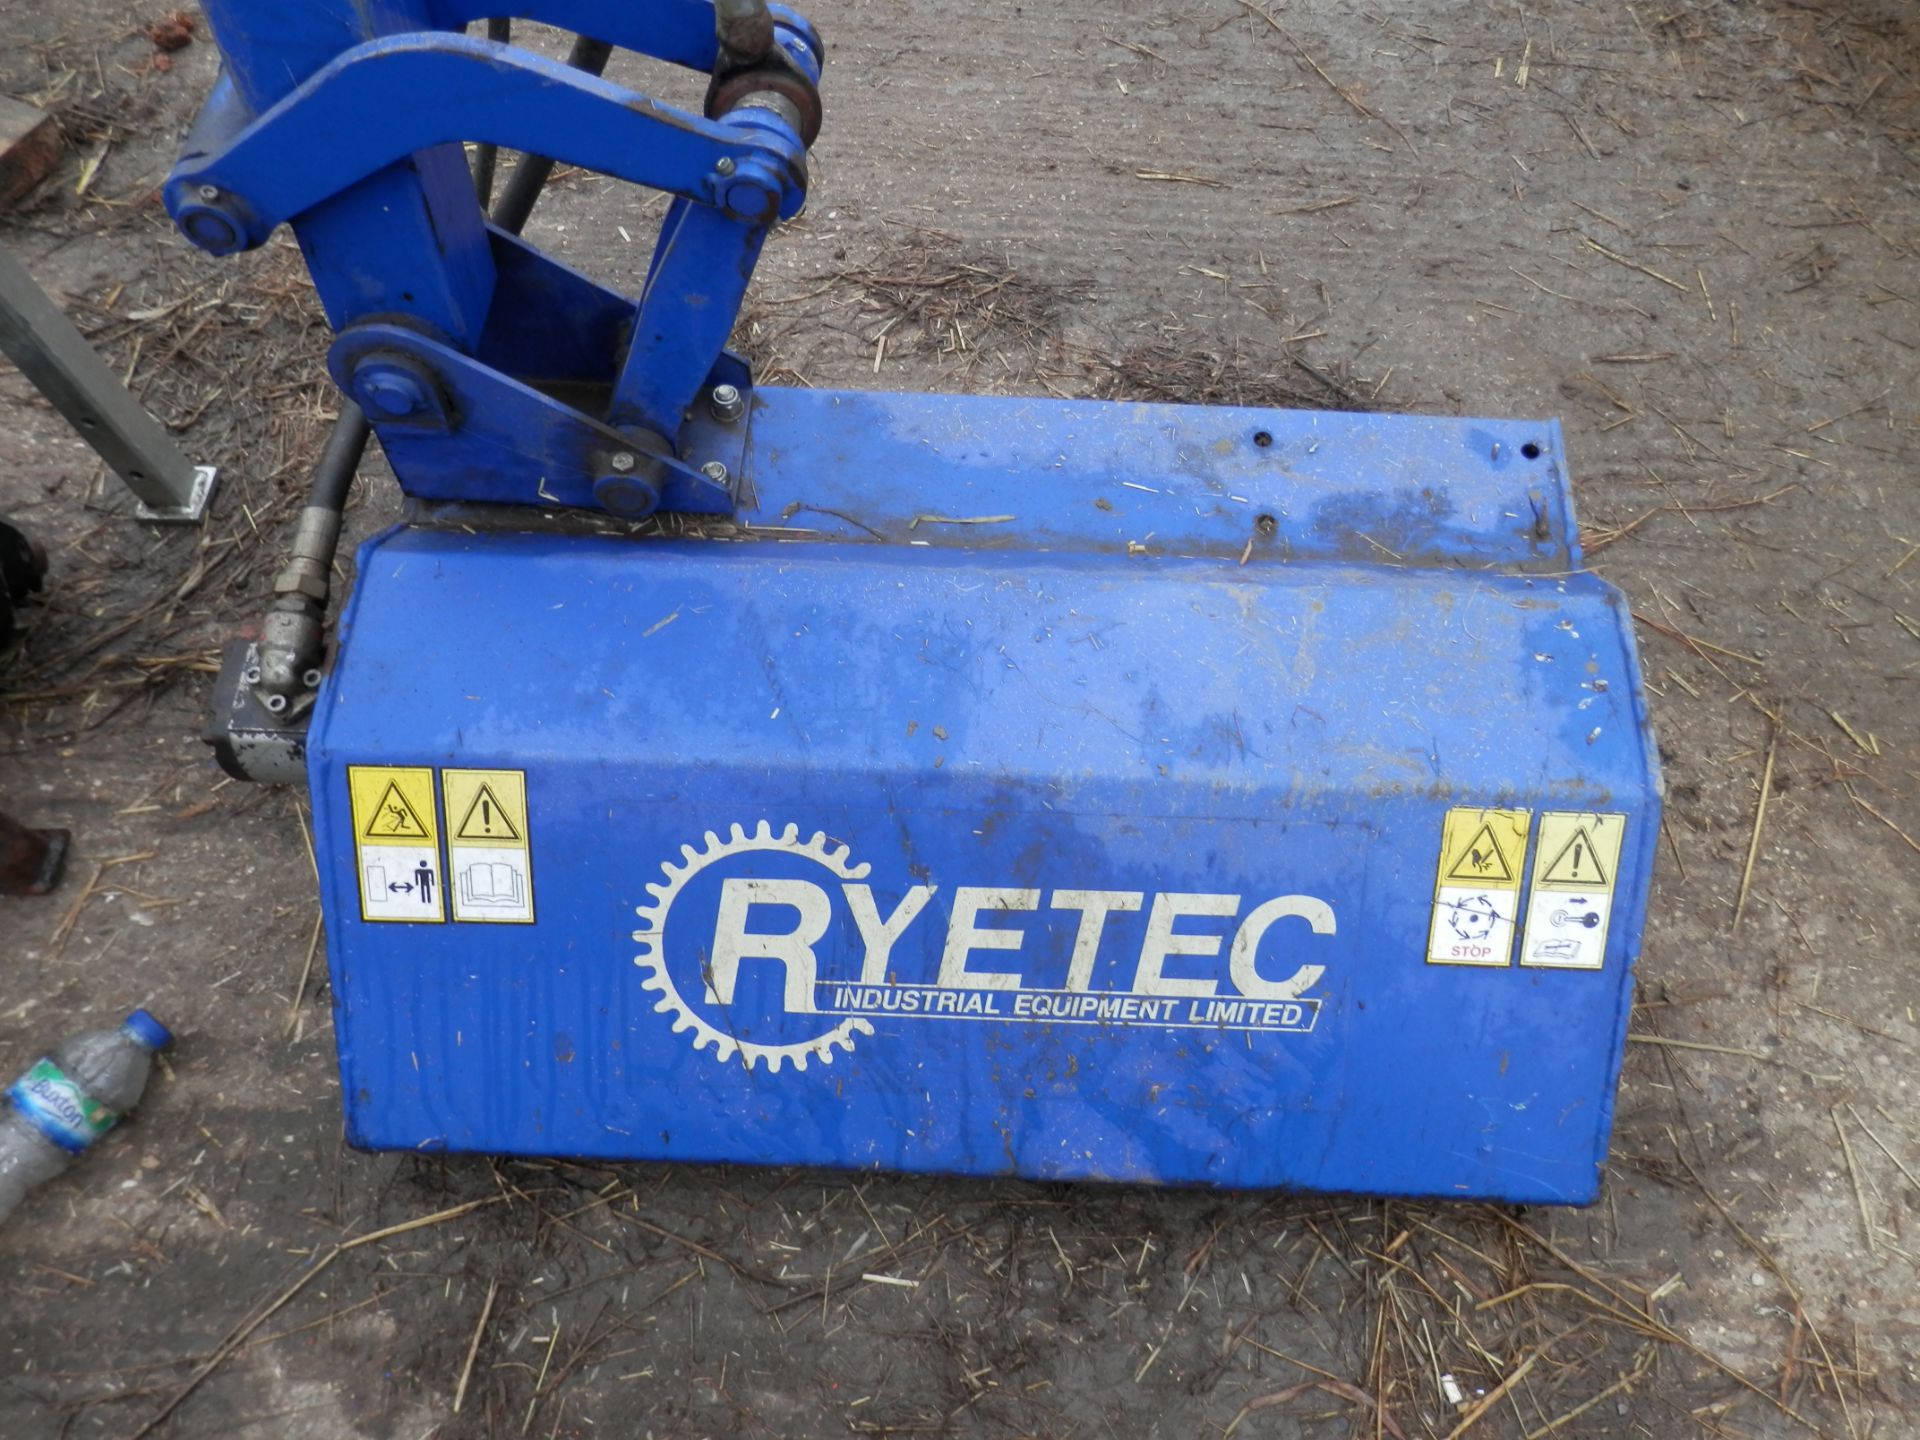 2002 RYTEC MP 300 HEDGE CUTTER TRACTOR ARTTACHMENT - Image 5 of 8